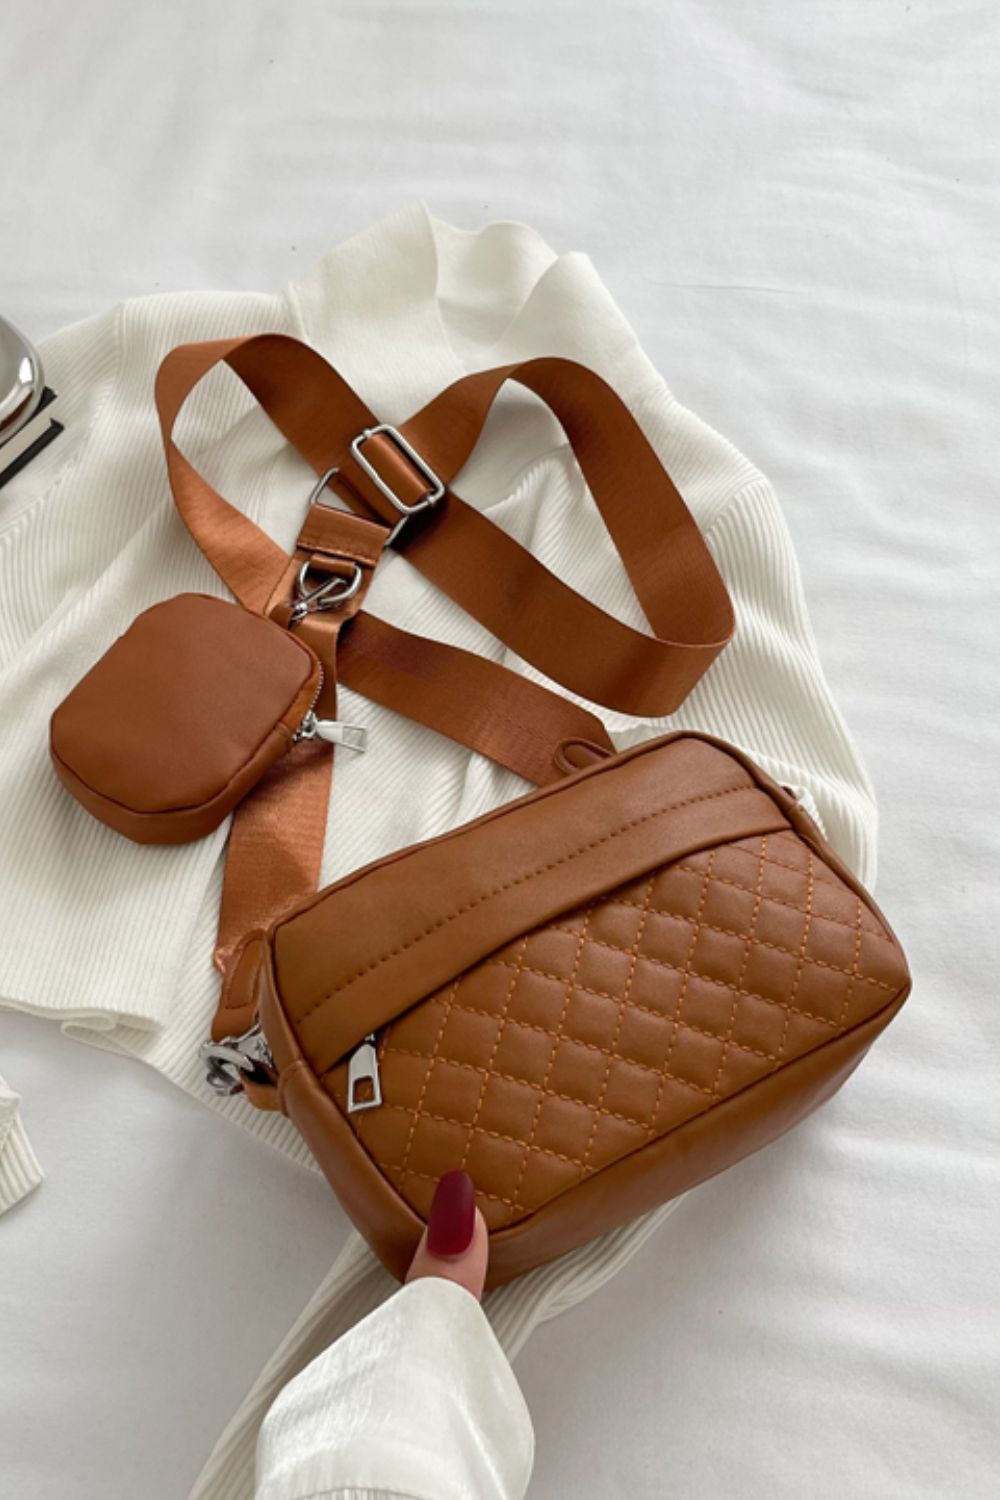 Small Purses With Long Straps: Versatility + Style | LoveToKnow